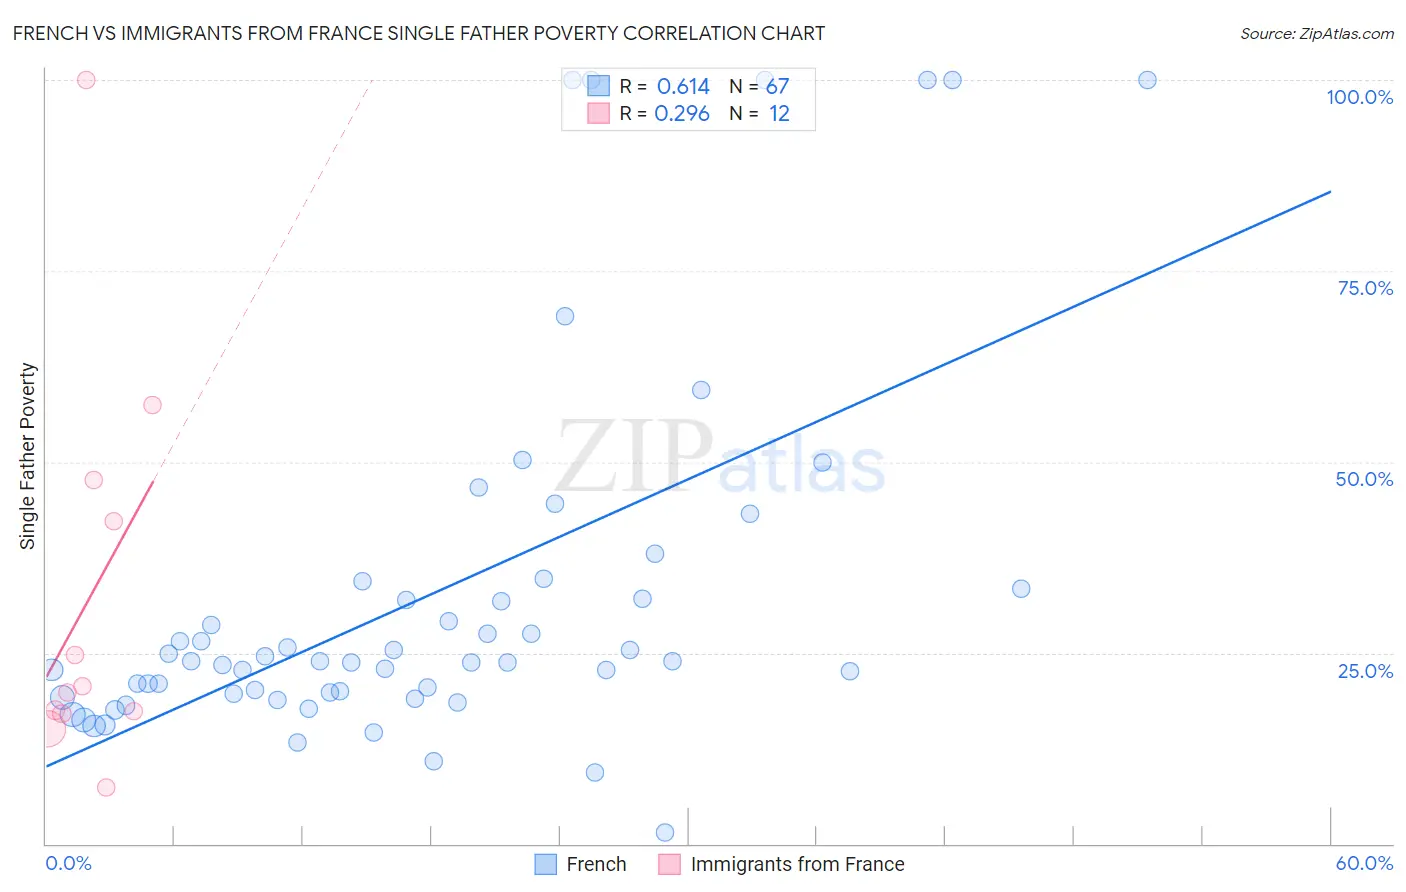 French vs Immigrants from France Single Father Poverty